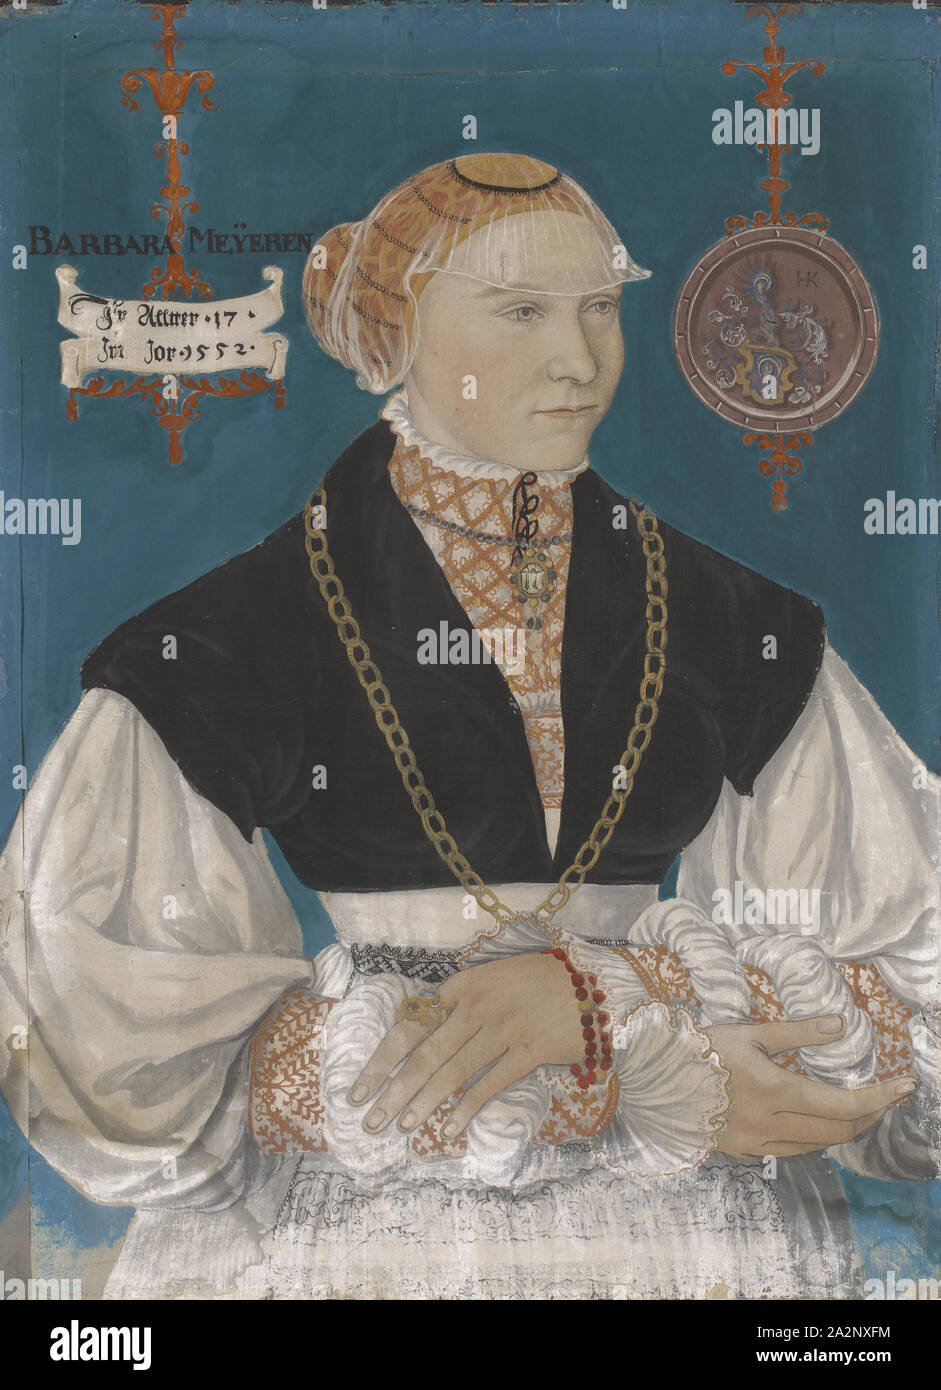 Portrait of Barbara Meyer zum Pfeil, the wife of Hans Rispach, 1552, tempera on paper, mounted on canvas, 51 x 38 cm, signed in medallion with the coat of arms: iHK [ligated], dated on the tapes: Ir Alltter • 17 • In the Jor • 1552 •, above in black: BARBARA MEYEREN, Hans Hug Kluber, Basel 1535/36–1578 Basel Stock Photo